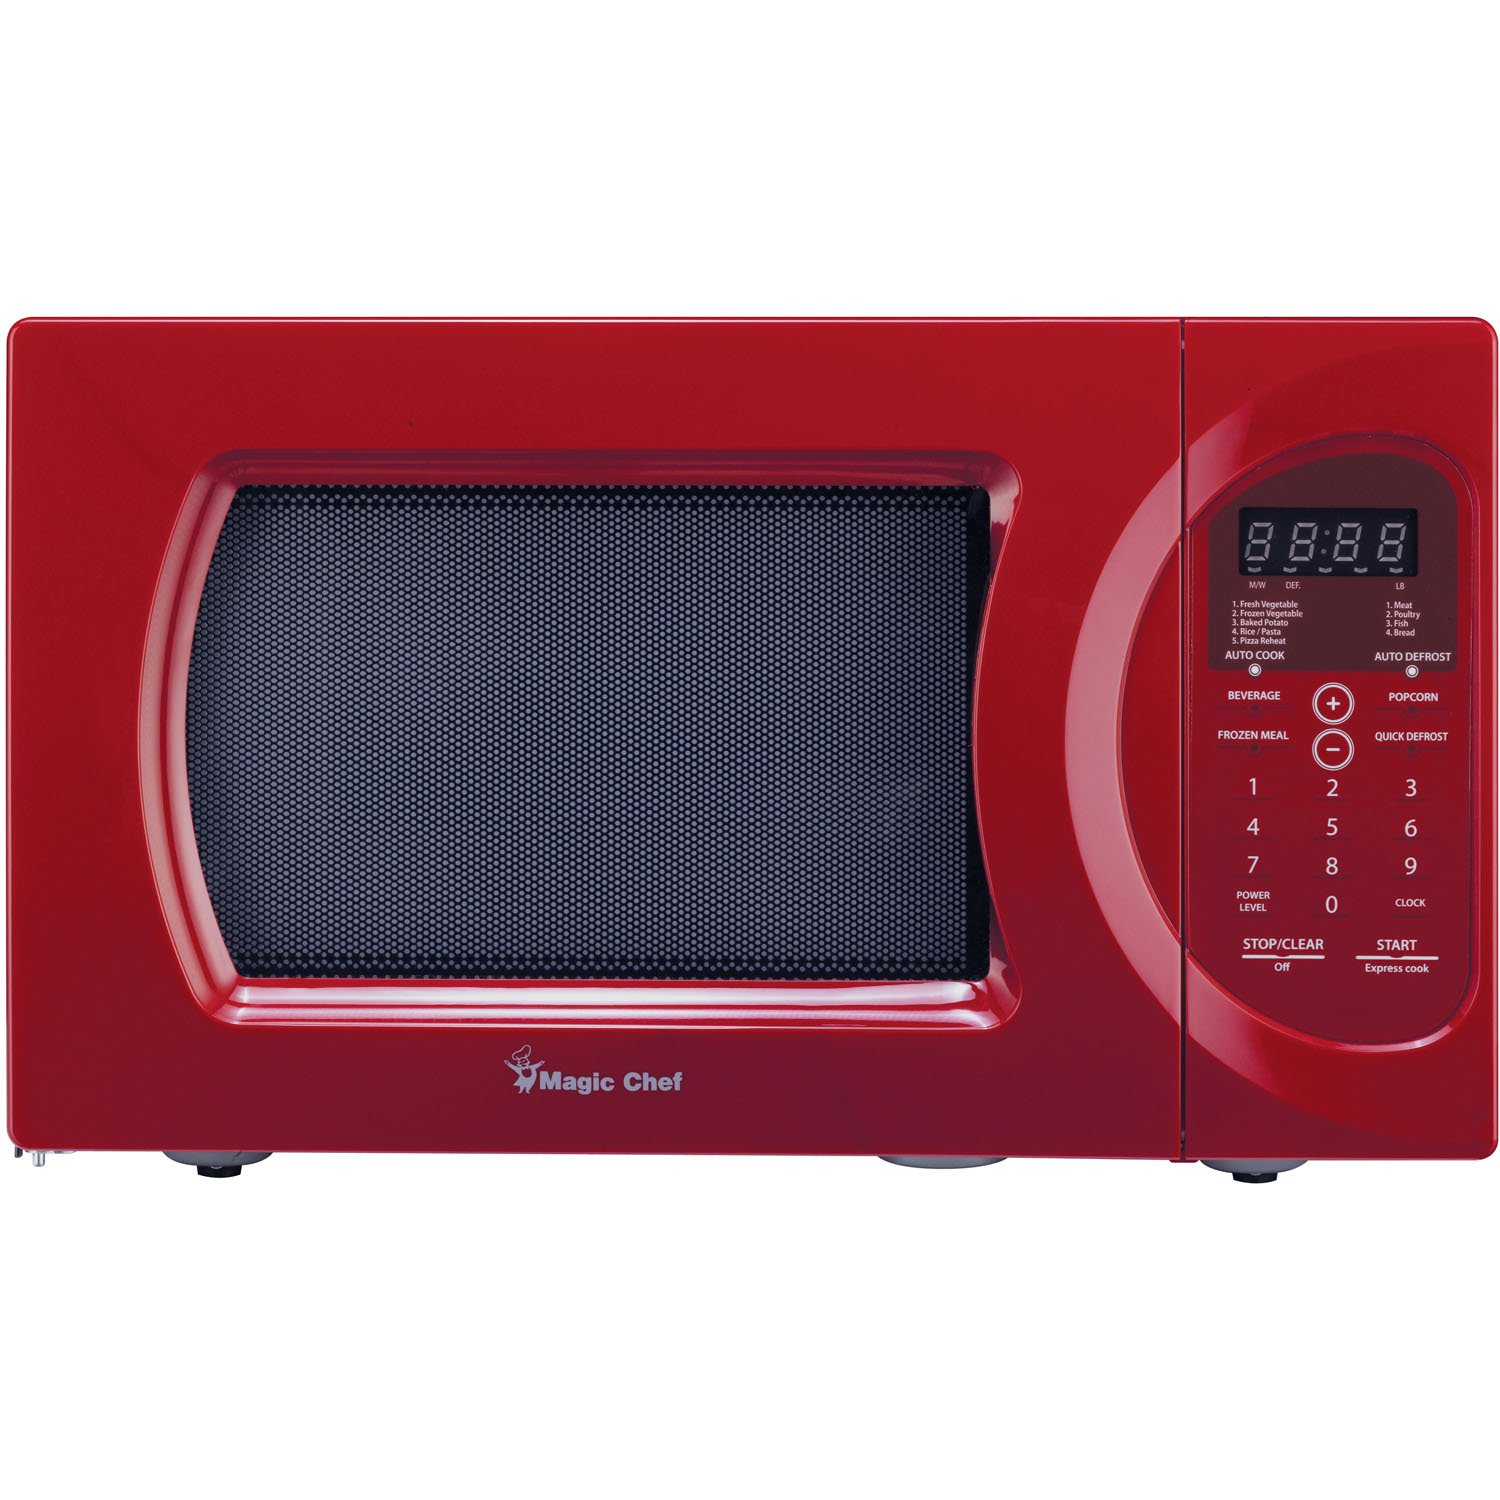 Magic Chef MCD992R 0.9 Cu. Ft. 900W Oven in Red Countertop Microwave